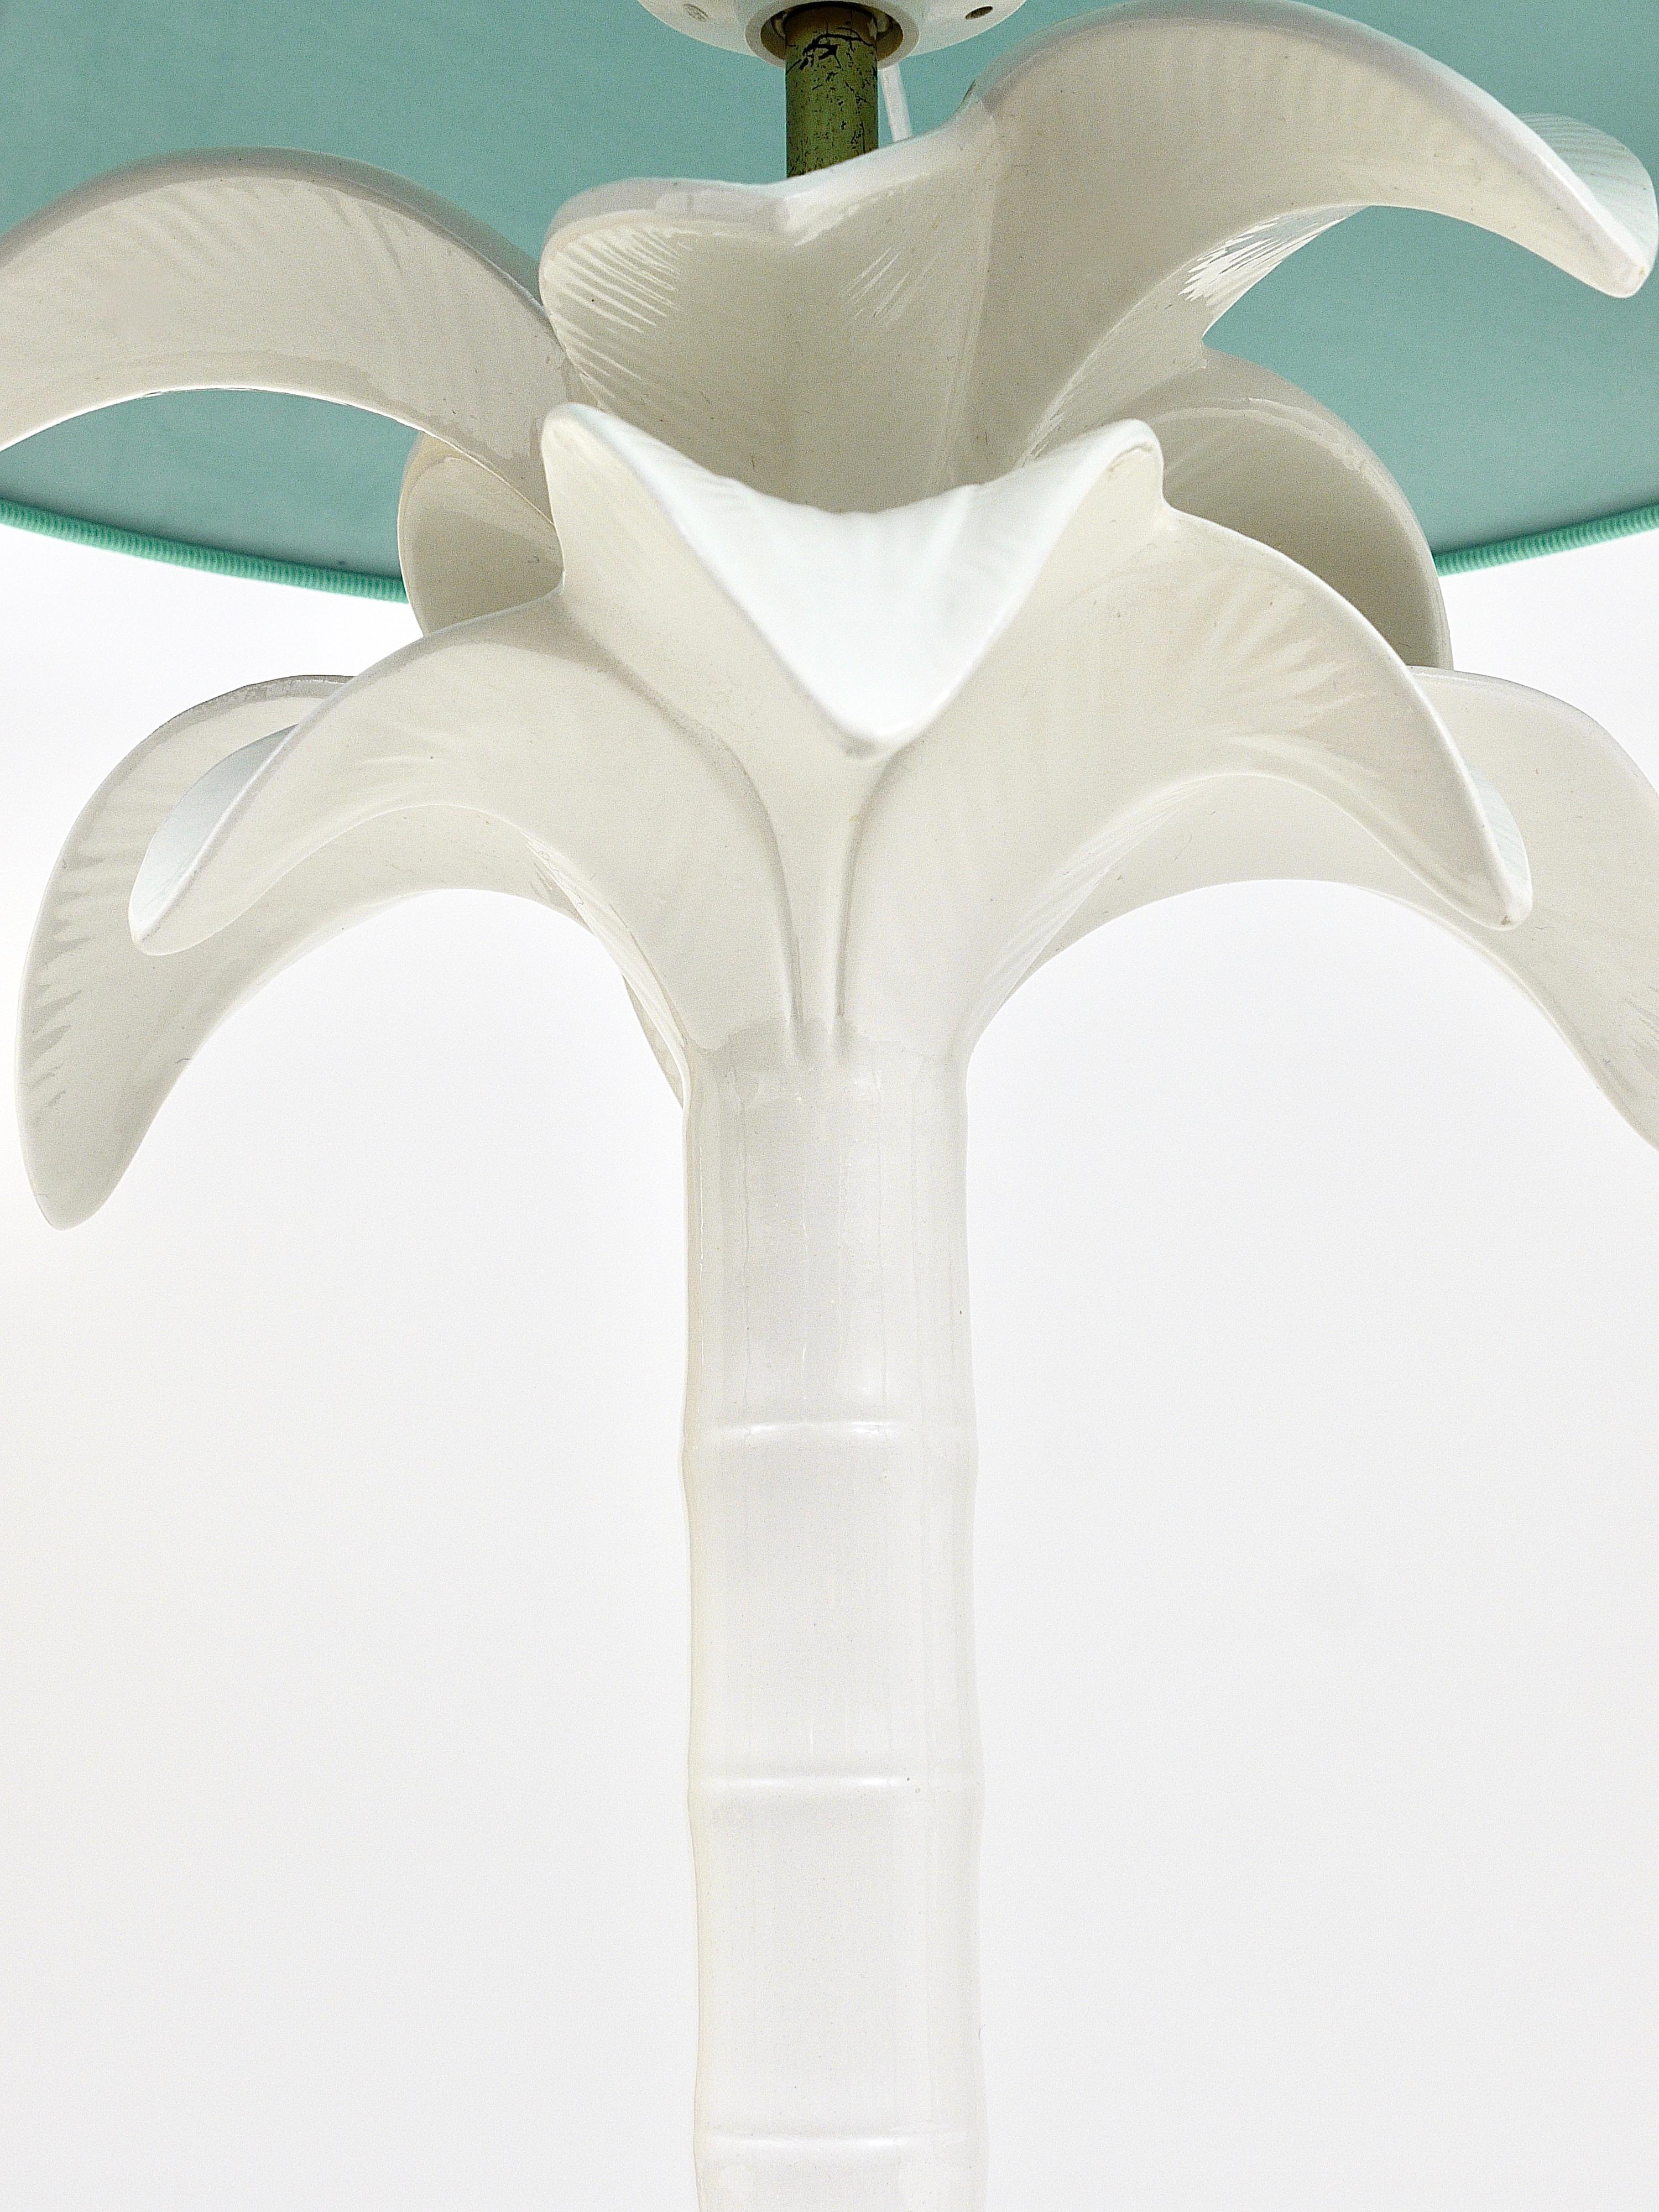 Tommaso Barbi White Palm Tree Faux Bamboo Table Lamp, Italy, 1970s For Sale 3